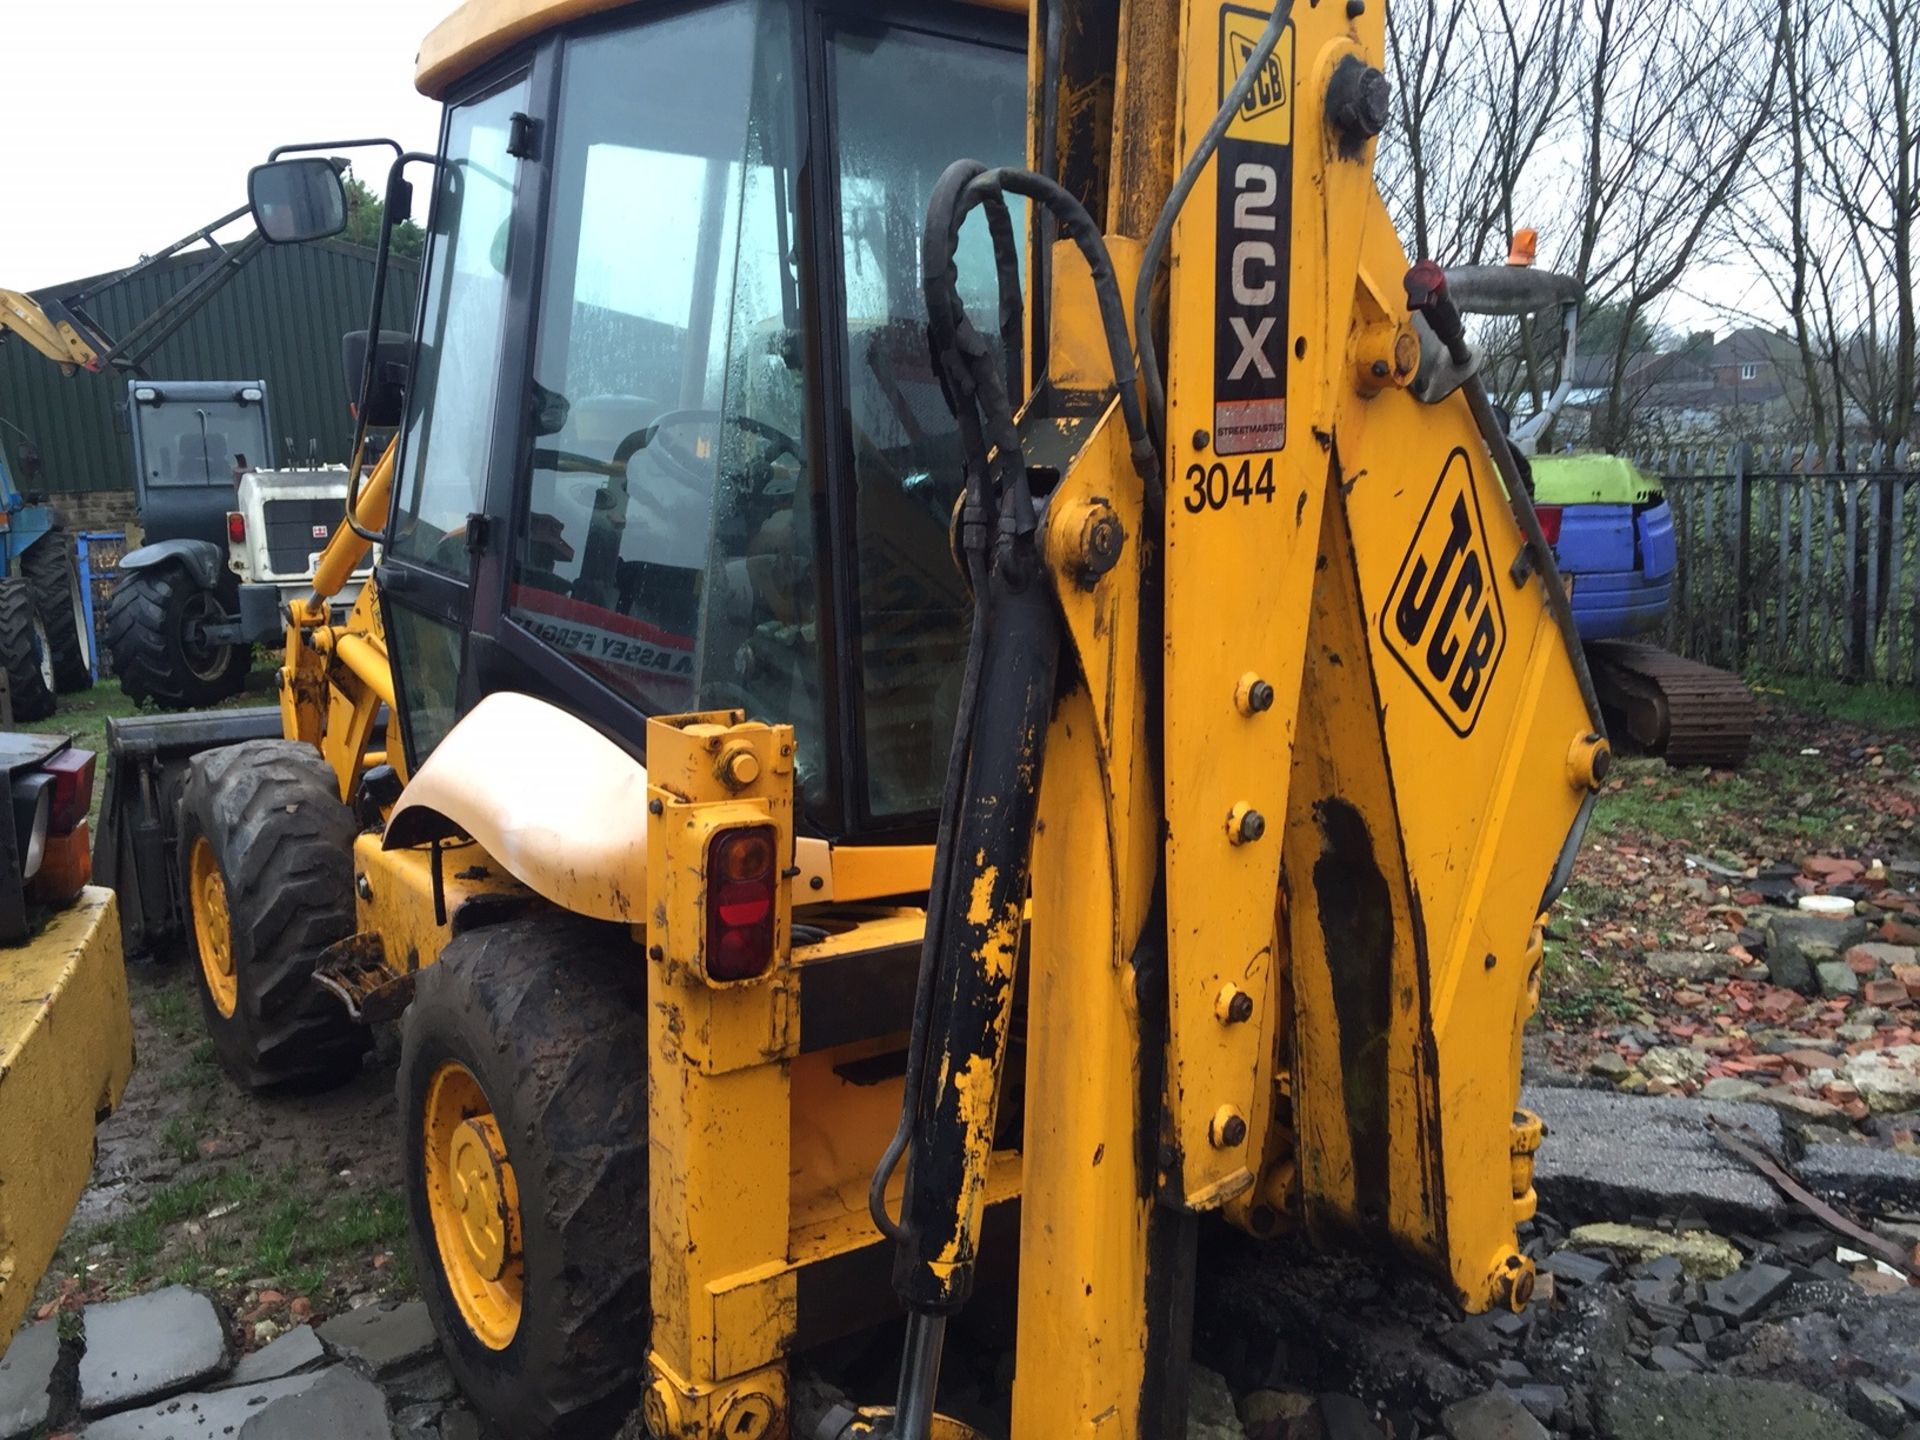 DS - 2003 JCB 2CX STREET MASTER BACKHOE LOADER  EX COUNCIL YEAR OF MANUFACTURE 2003 GOOD CONDITION - - Image 4 of 7